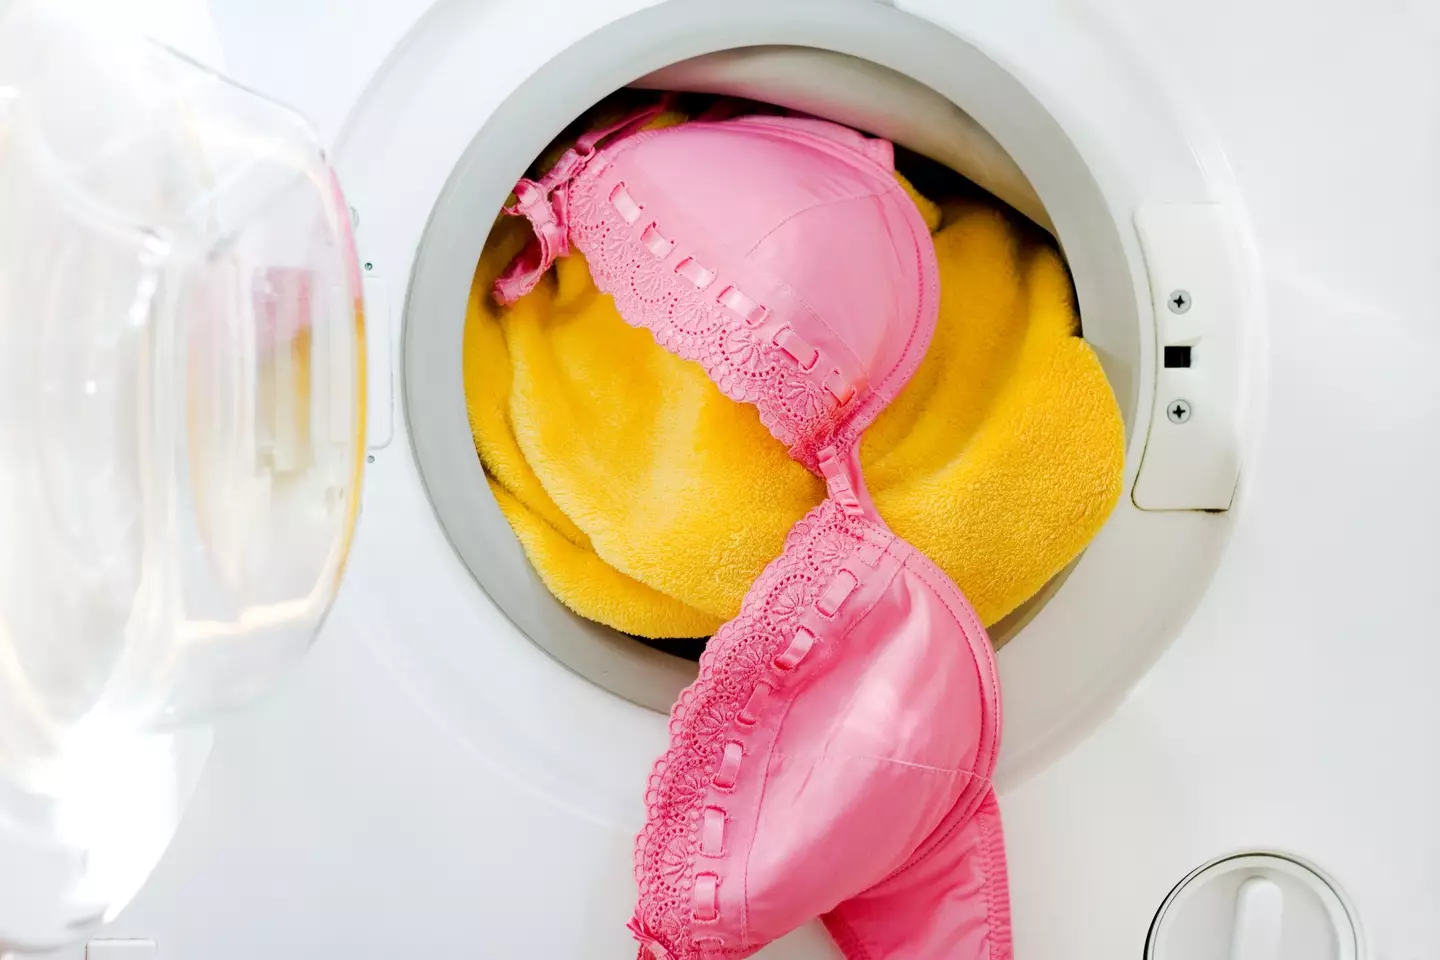 A debate about bra-washing has sparked online. (deepblue4you / Getty Images)